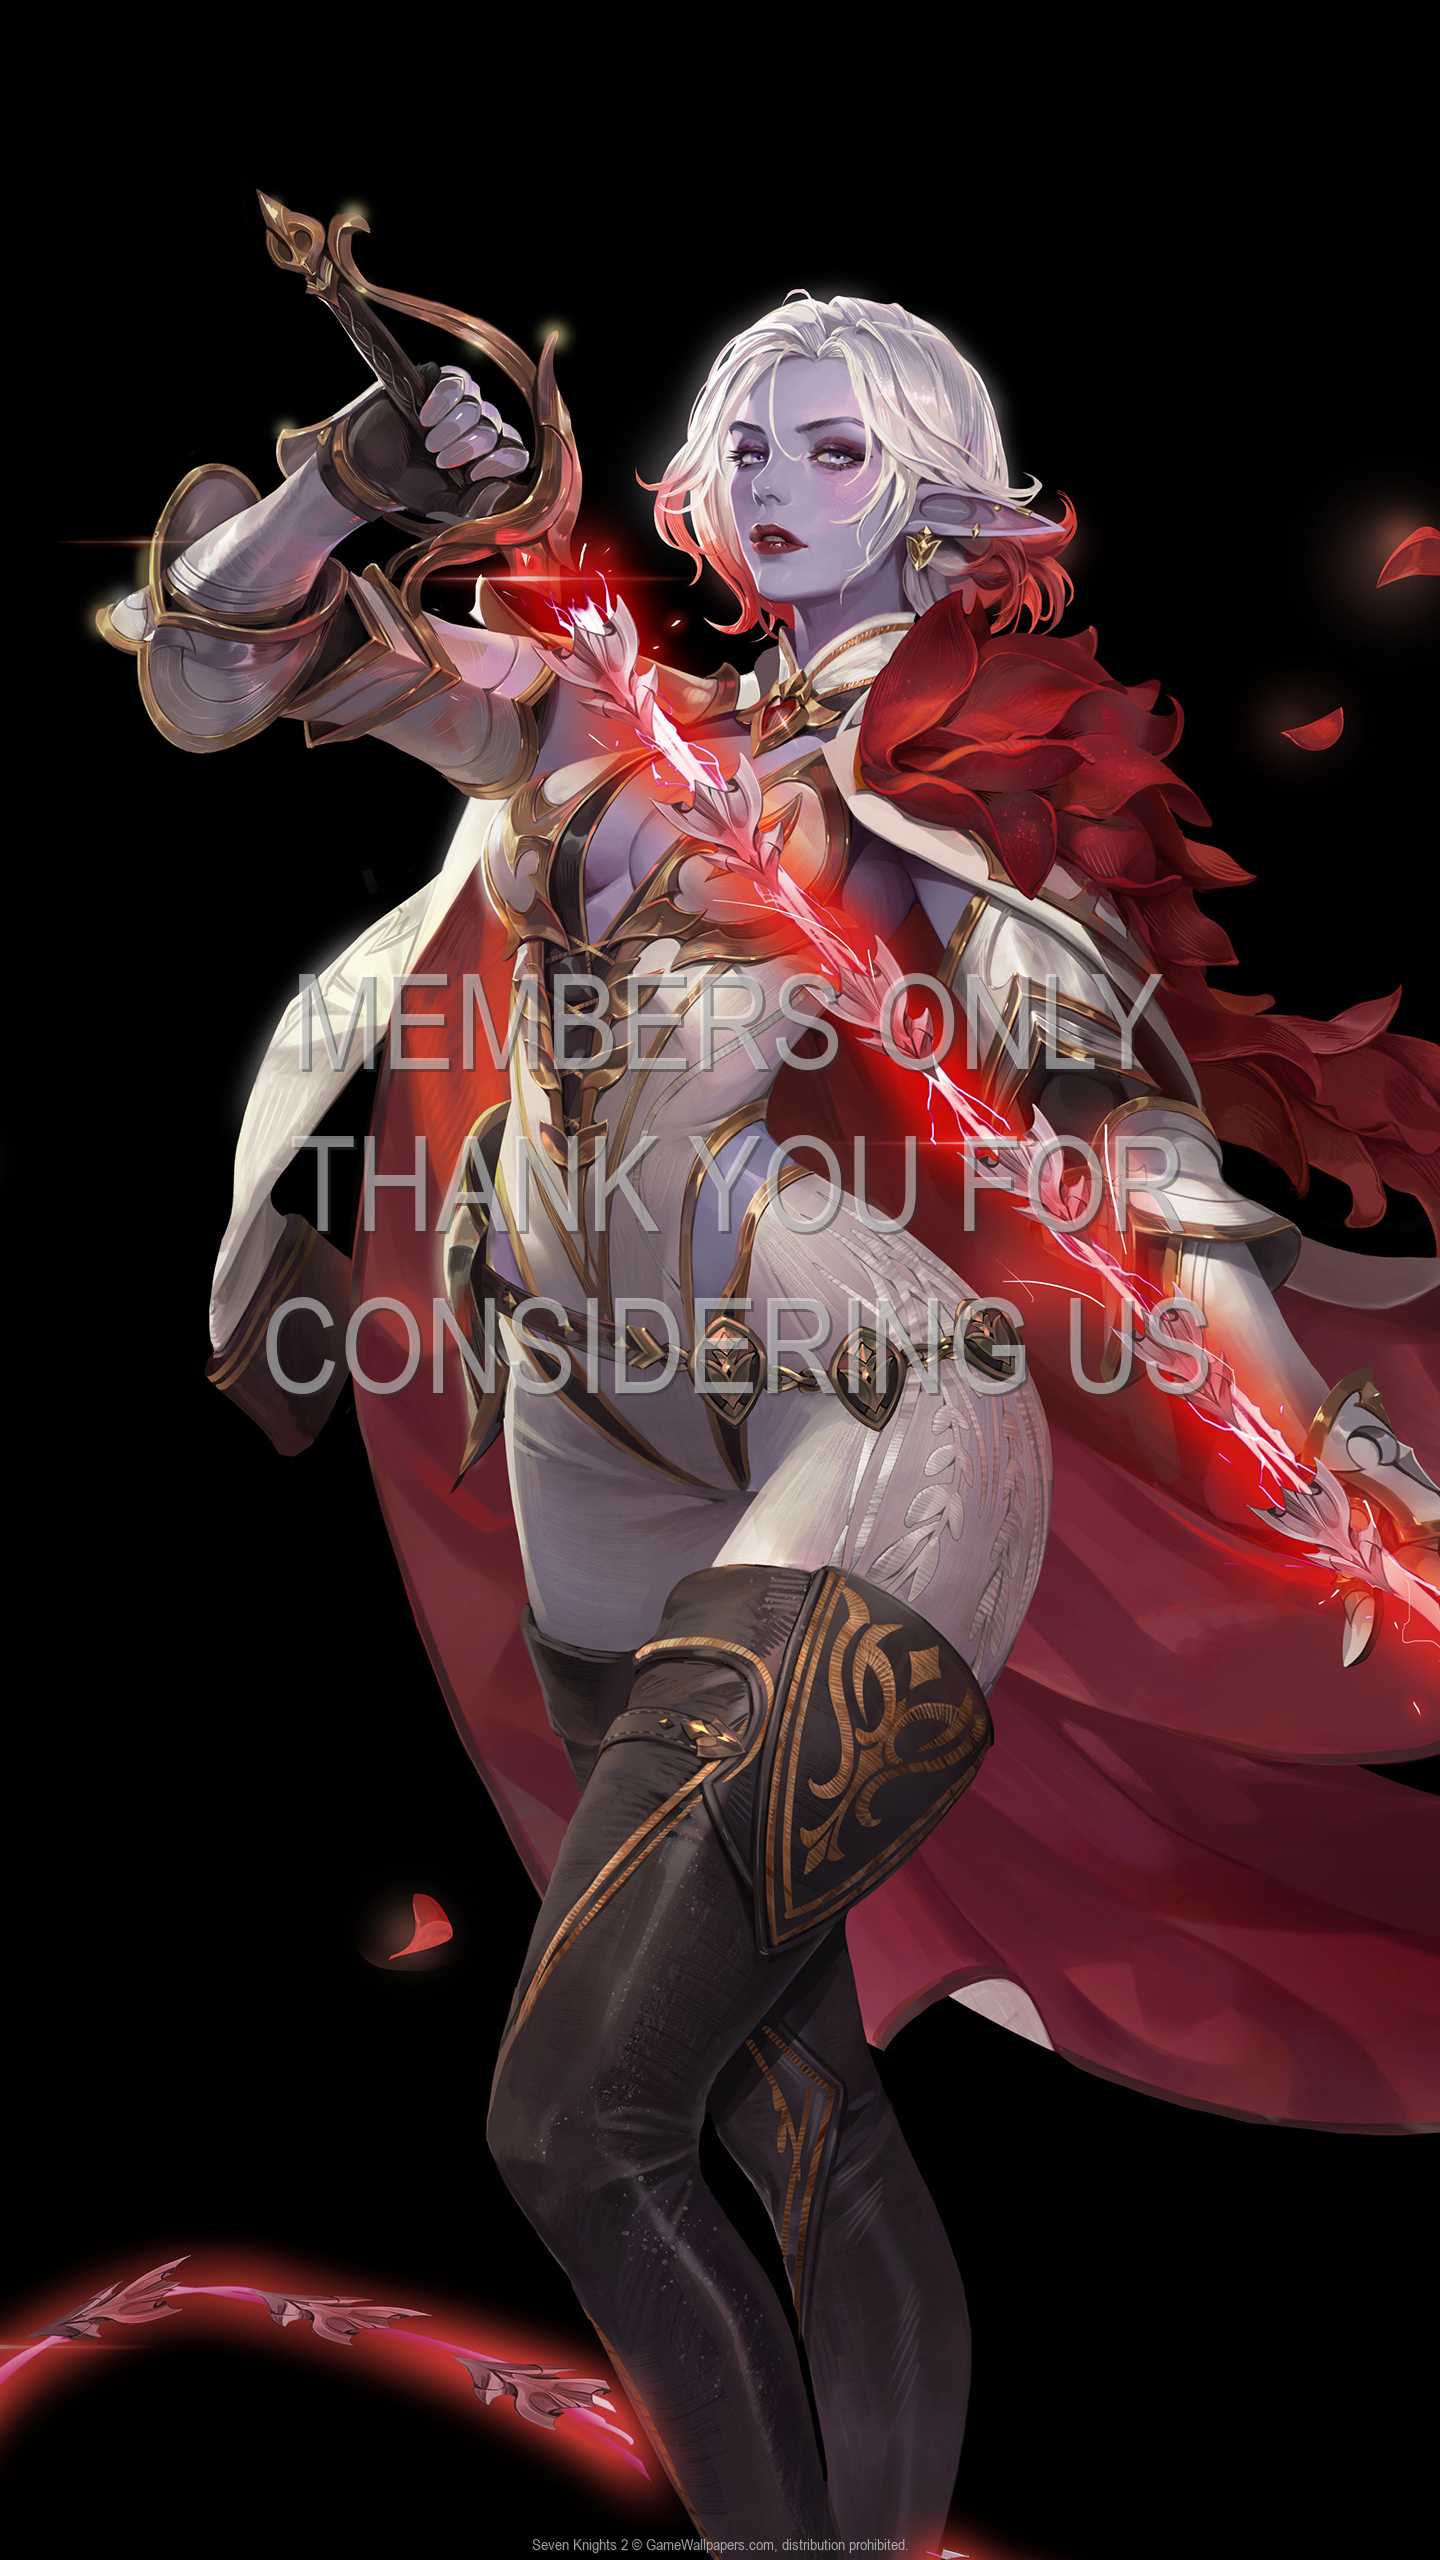 Seven Knights 2 1440p Vertical Mobiele achtergrond 01